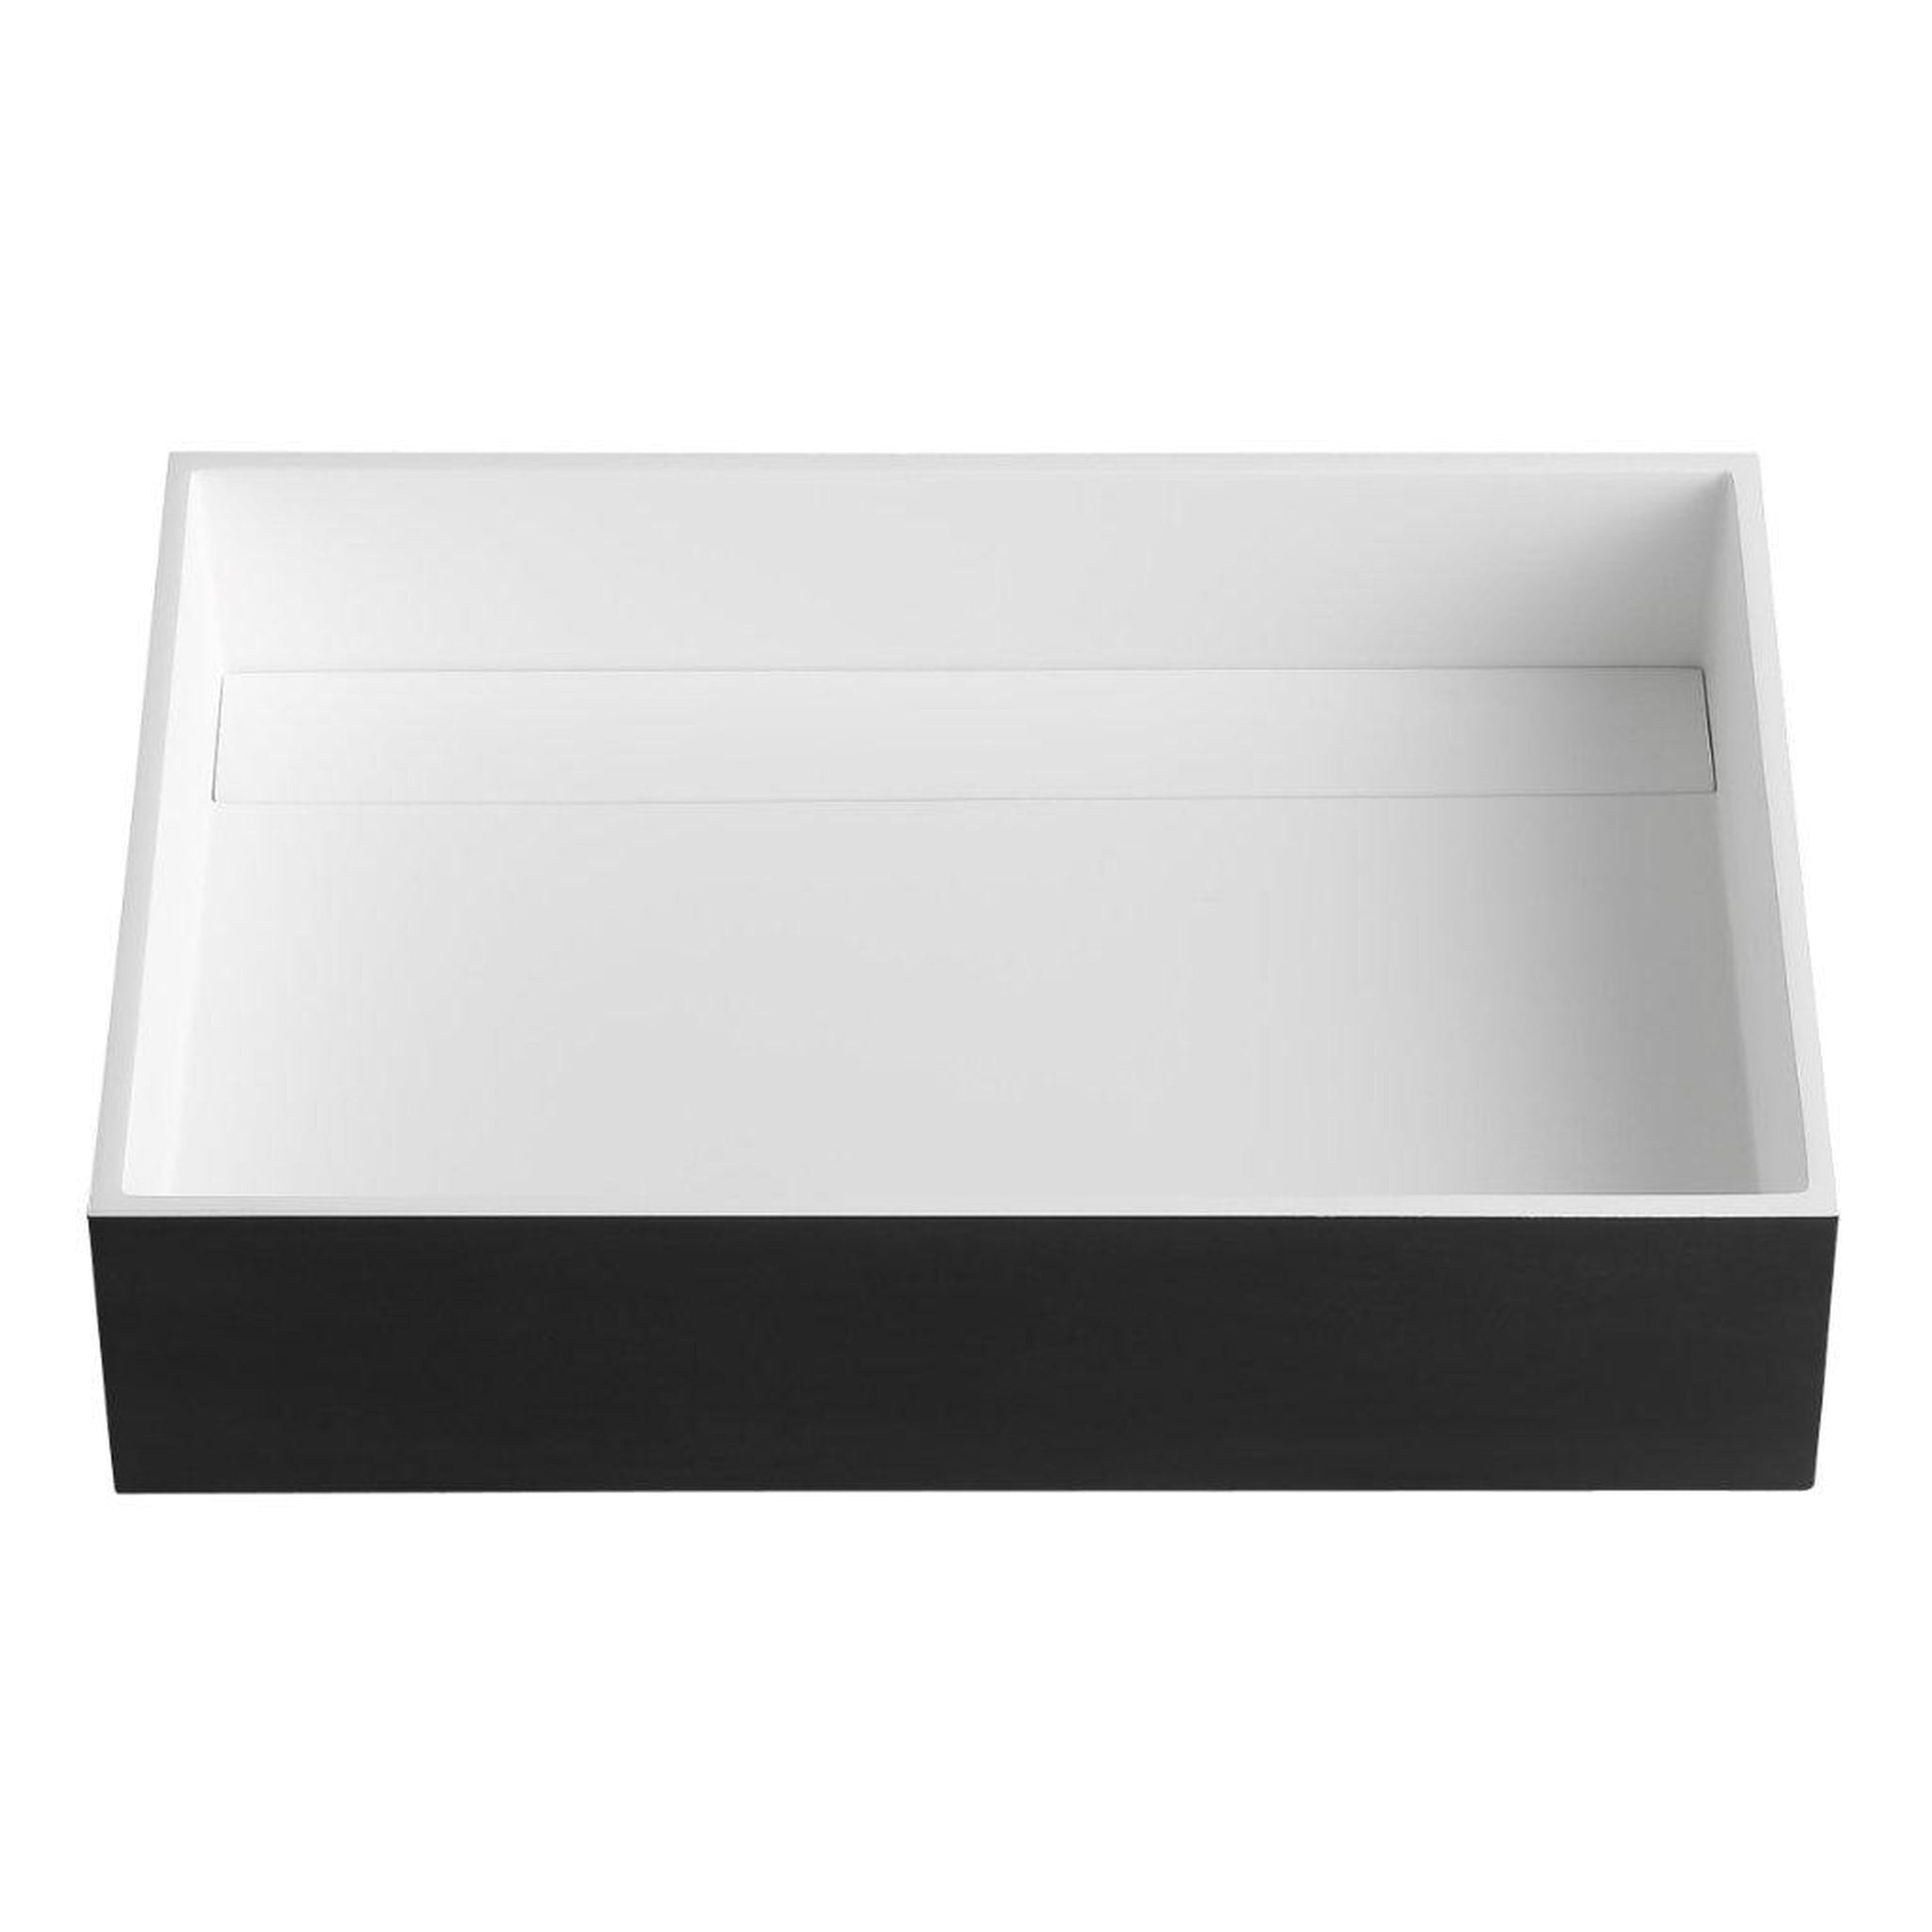 ALFI Brand ABRS2014BM 20" Black Matte Above Mount Rectangle Solid Surface Resin Bathroom Sink With Chrome Drain